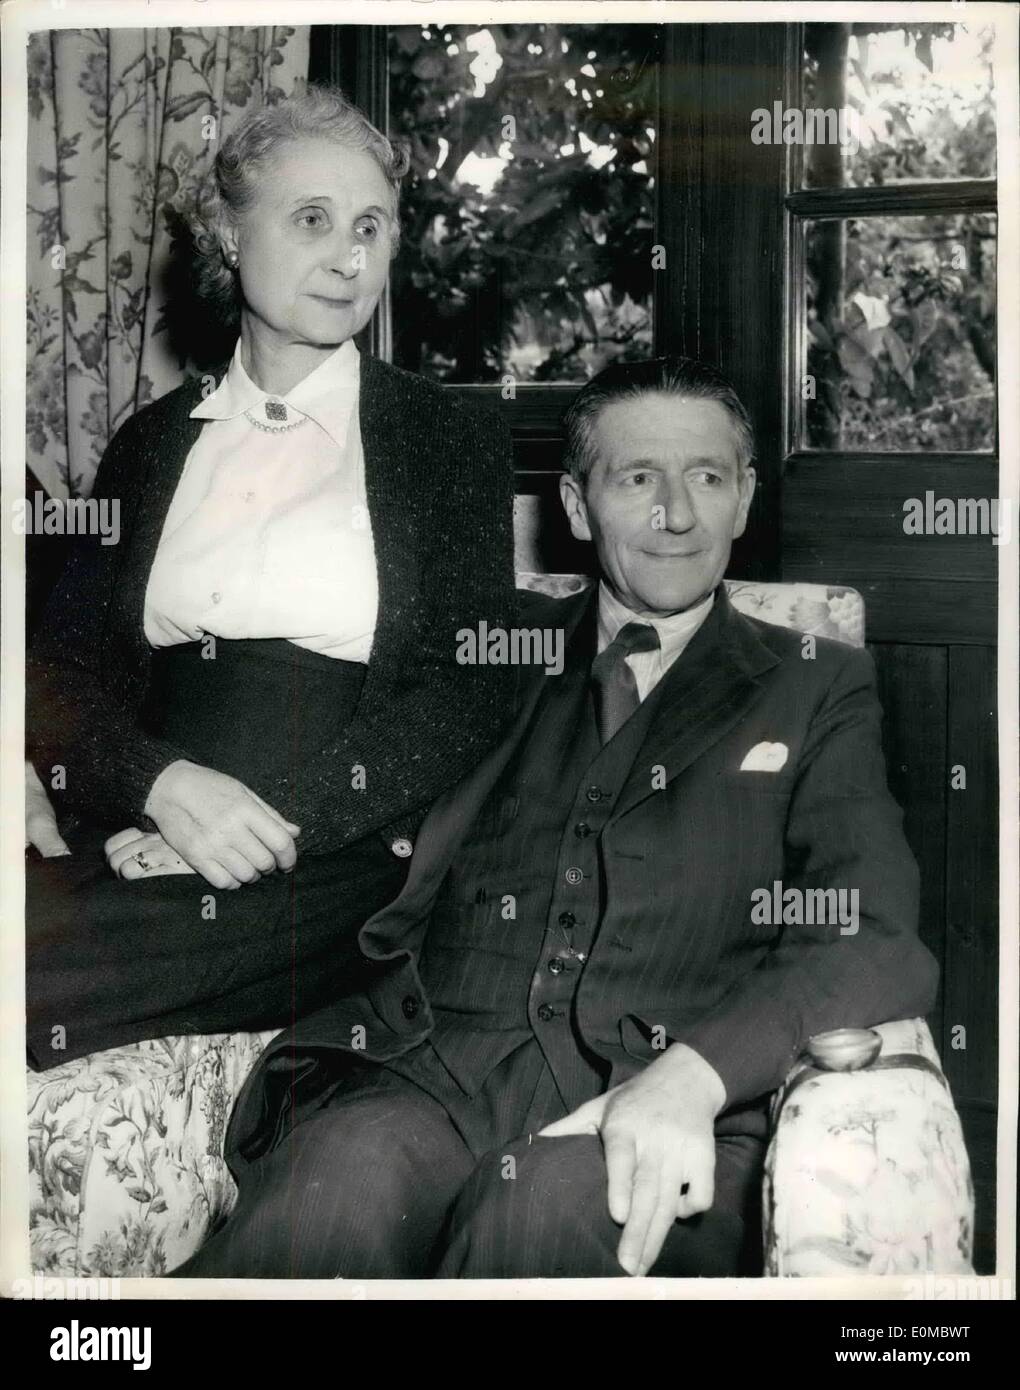 Aug. 08, 1954 - Baronet runs Deal toyshop. Photo shows Photographed with his wife at Deal yesterday - Sir Alexander King, who runs a toyshop in Deal has succeeded to the title following the death of his uncle, Sir George King, in South Africa. Stock Photo